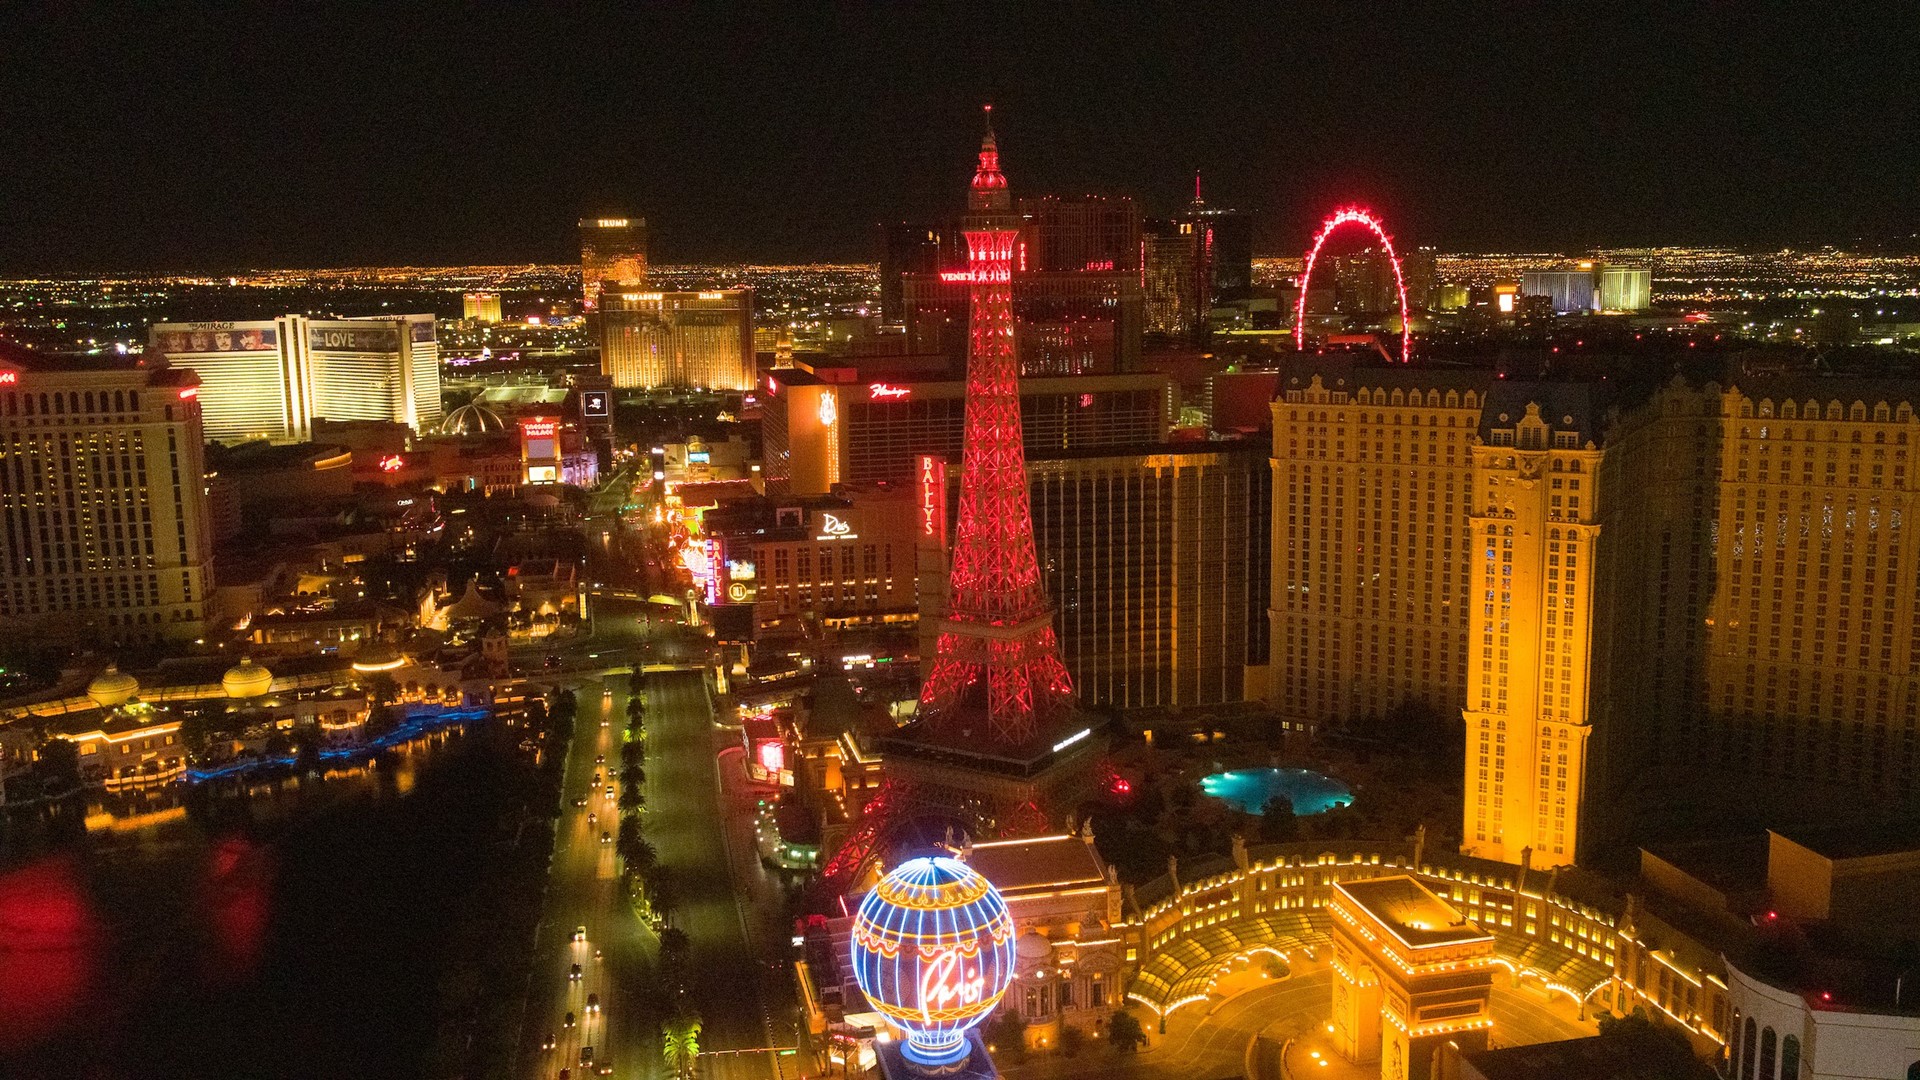 Las Vegas Strip Red Takeover May 5, 2020 Recognizing Hospitality Workers and the Spirit of Travel